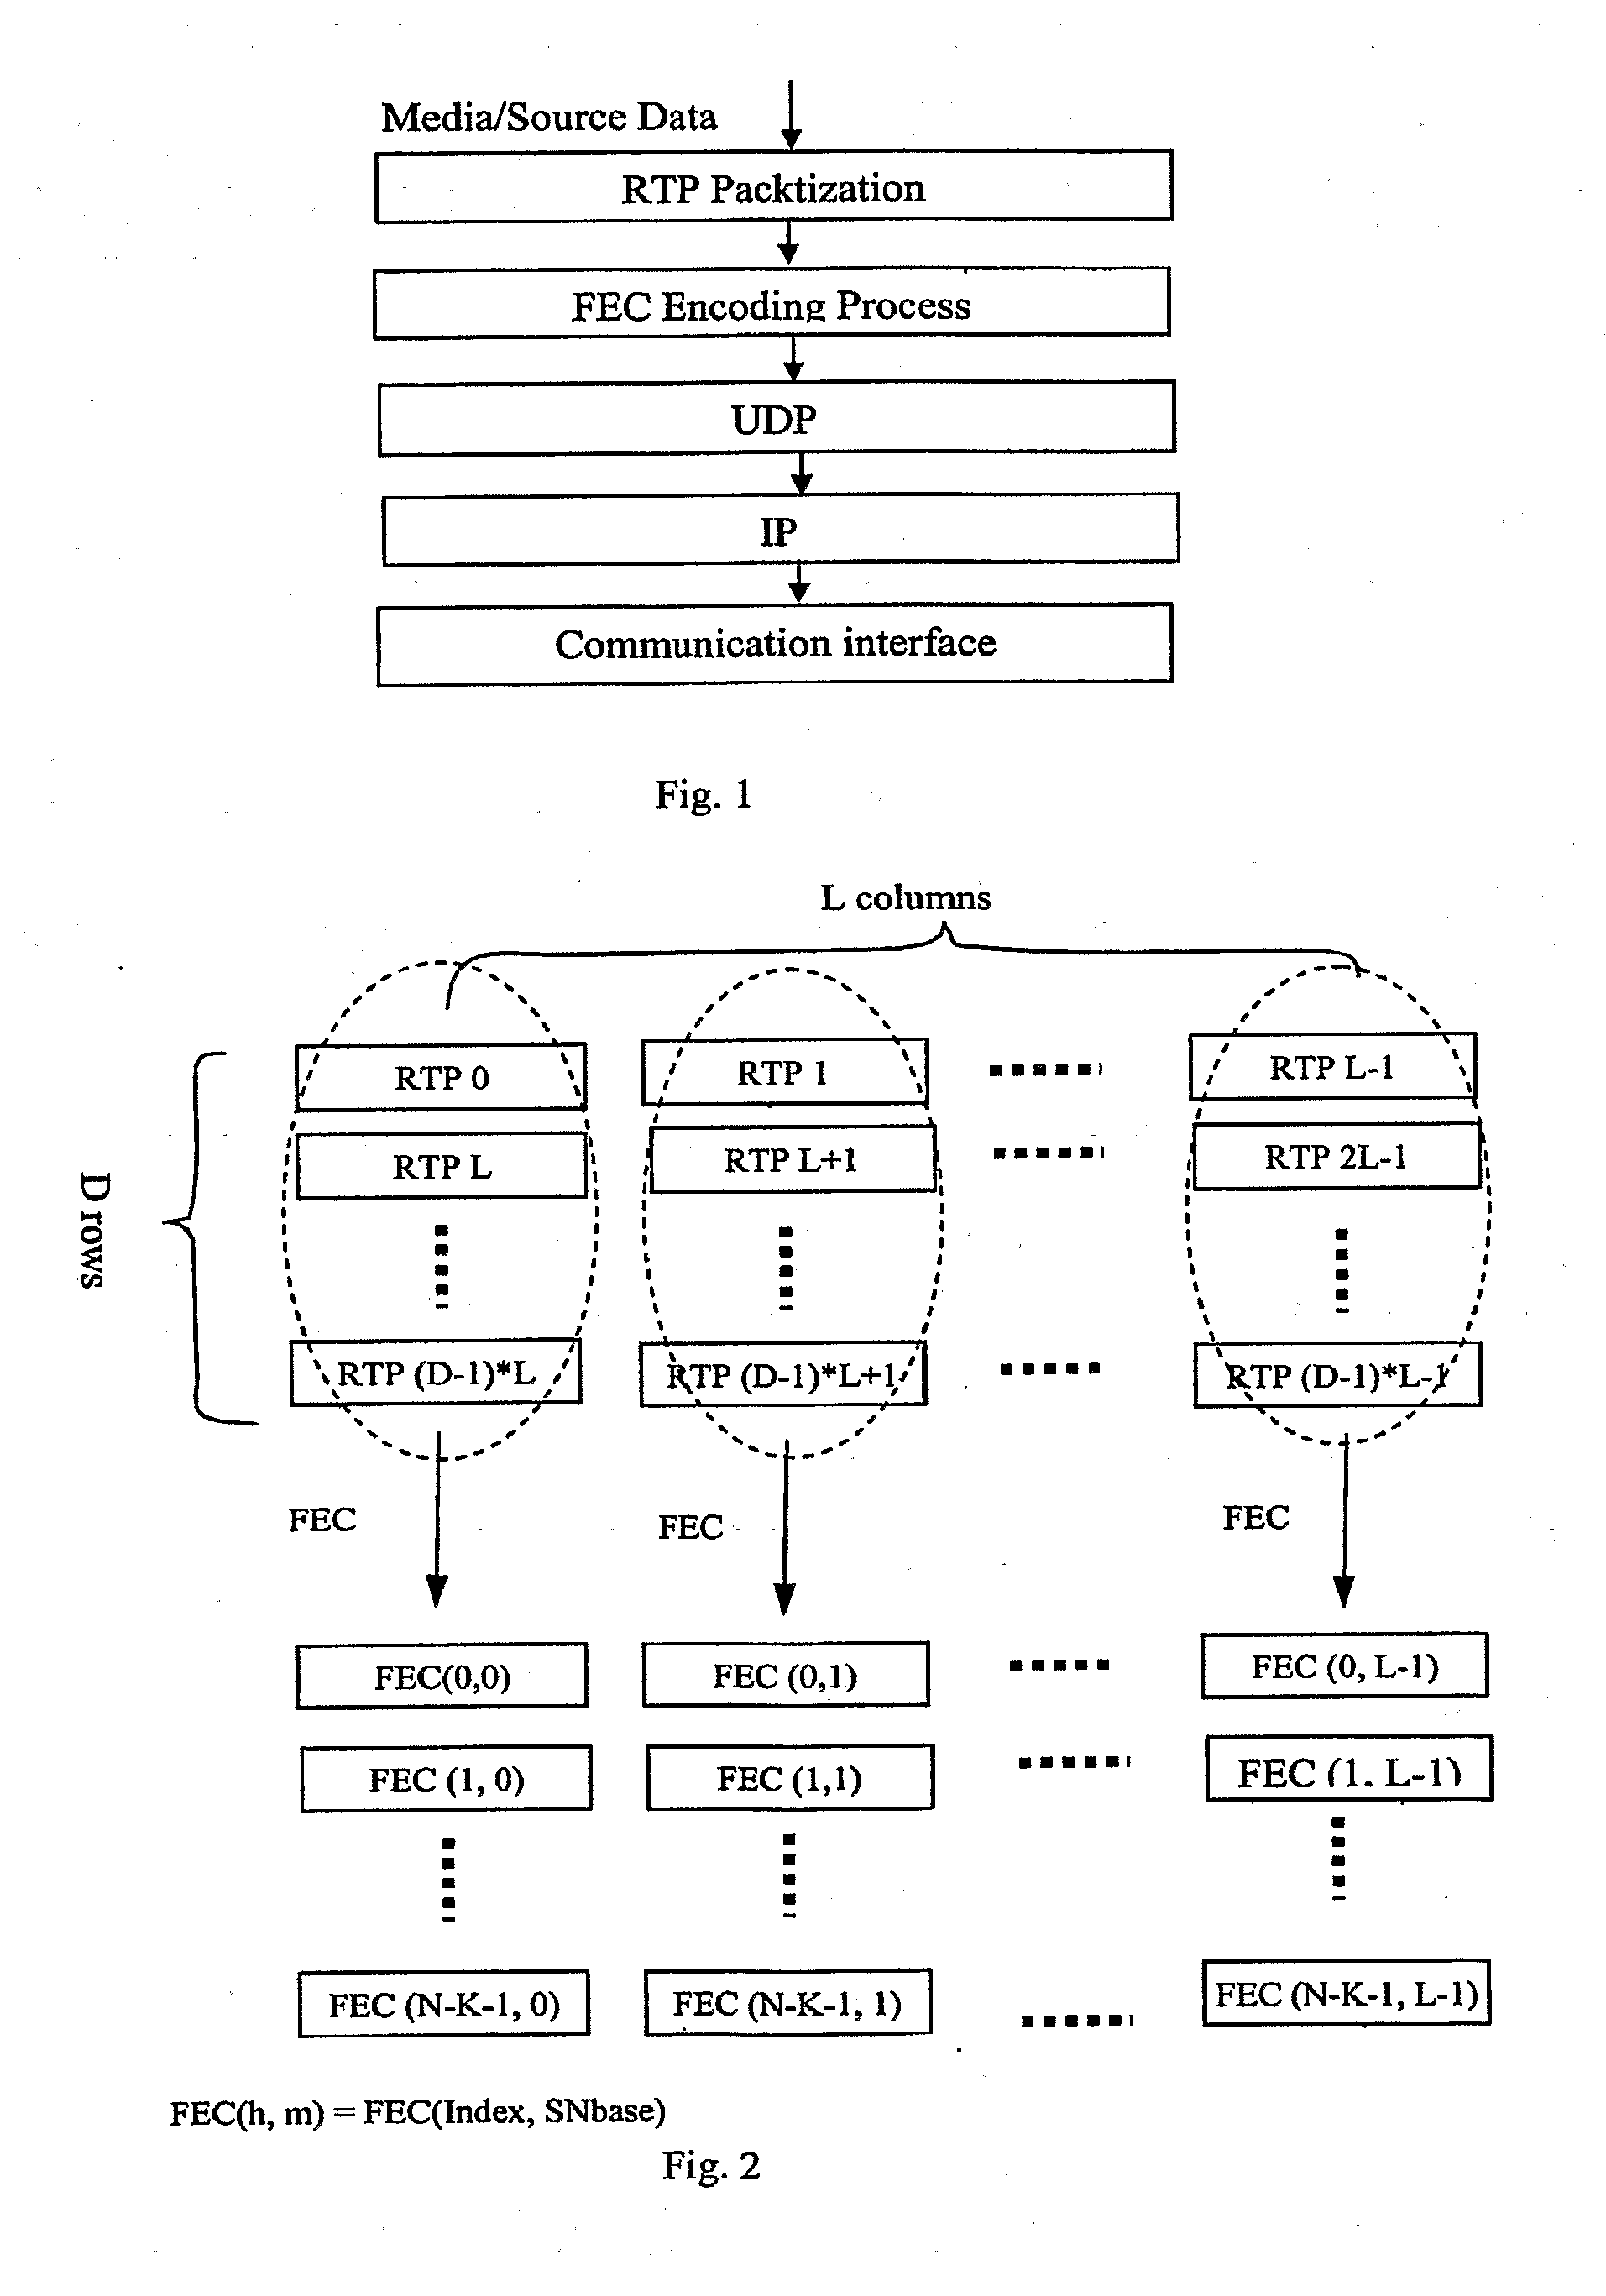 Method to support forward error correction for real-time audio and video data over internet protocol networks